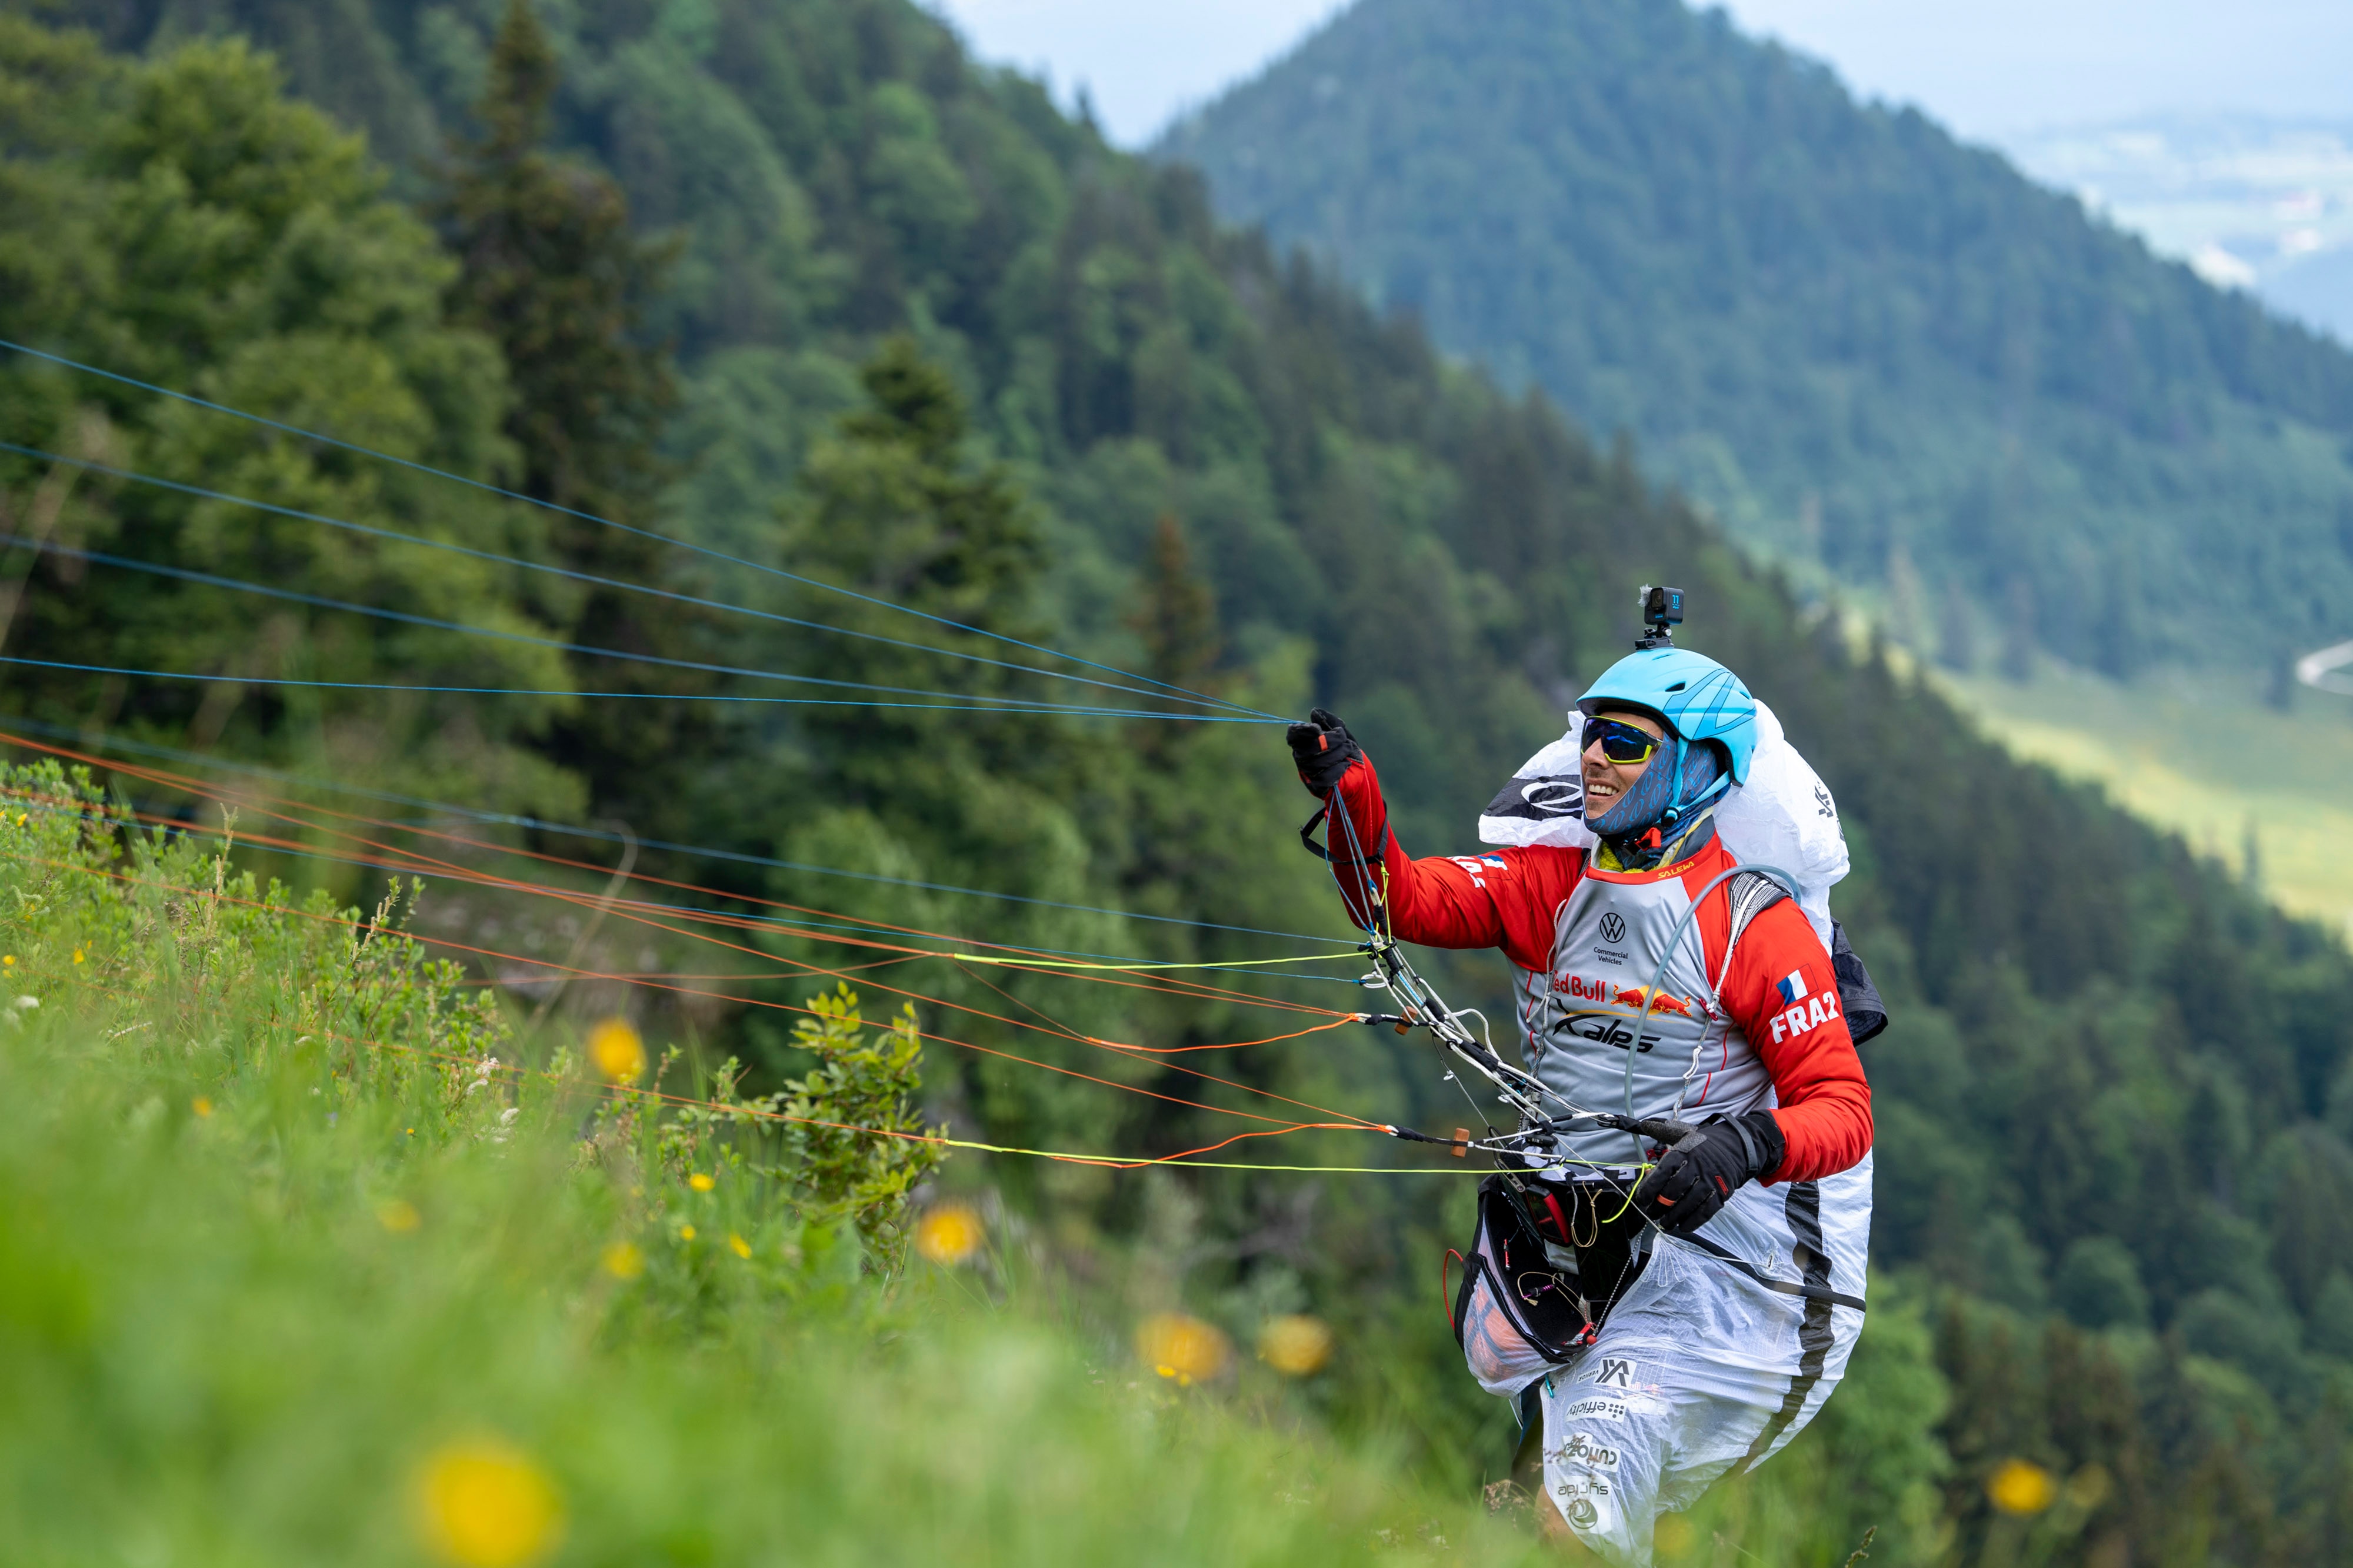 Damien Lacaze performs during the Red Bull X-Alps in Marquartstein, Austria on June 12, 2023.